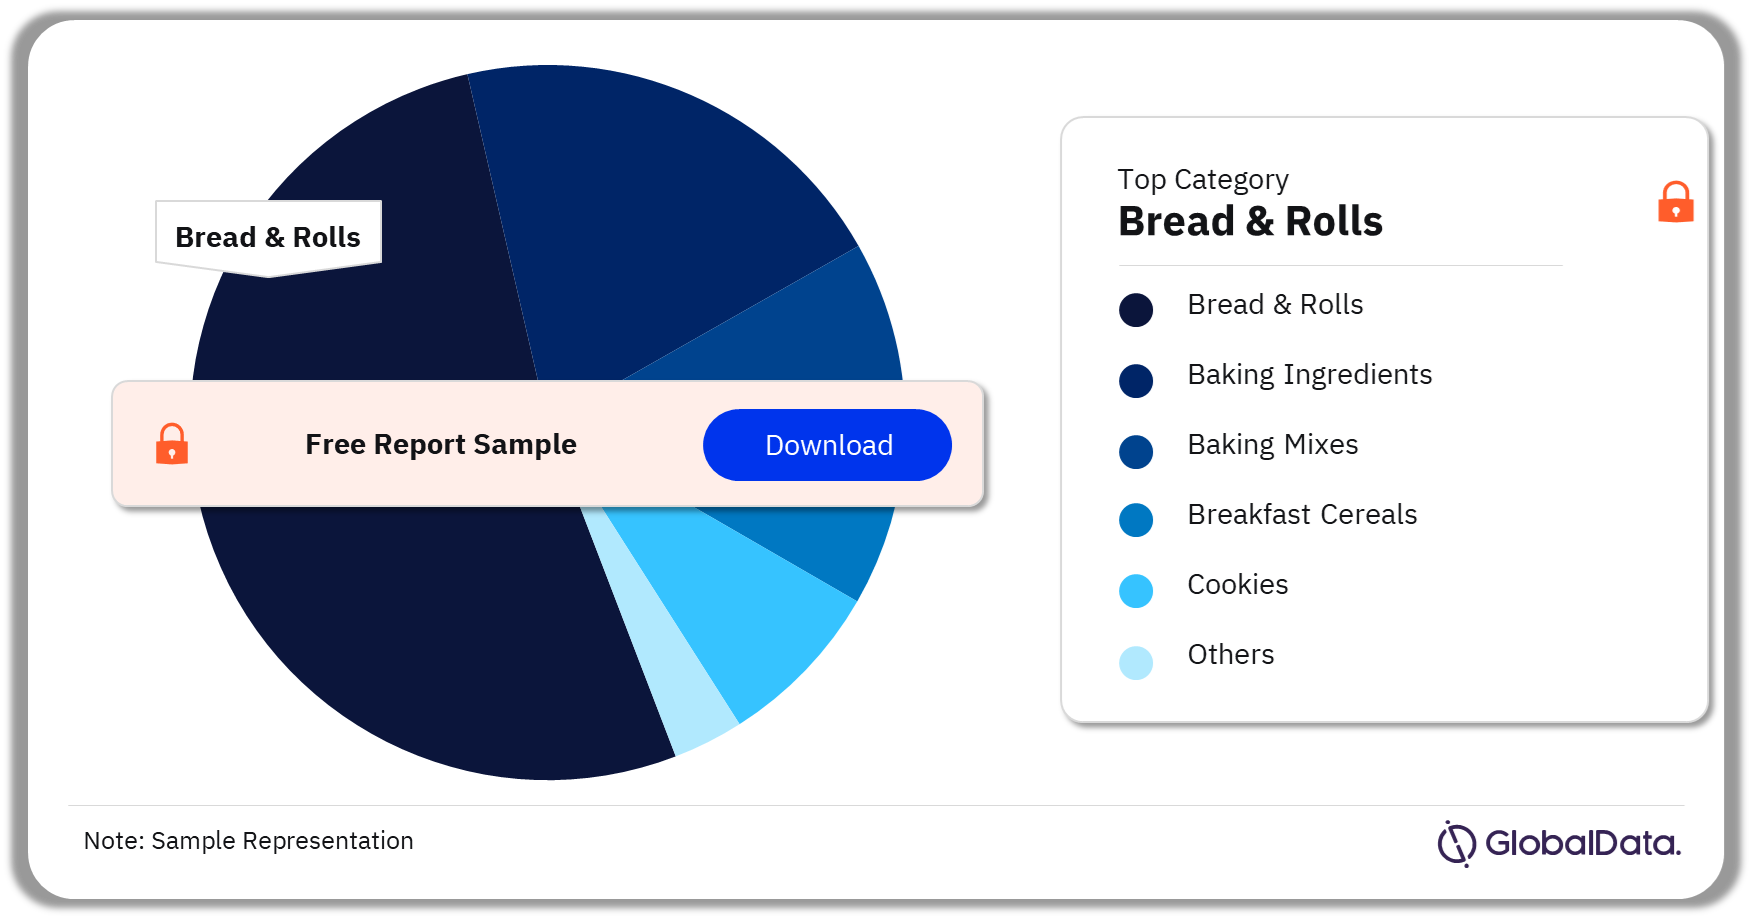 Saudi Arabia Bakery and Cereals Market Analysis, by Categories